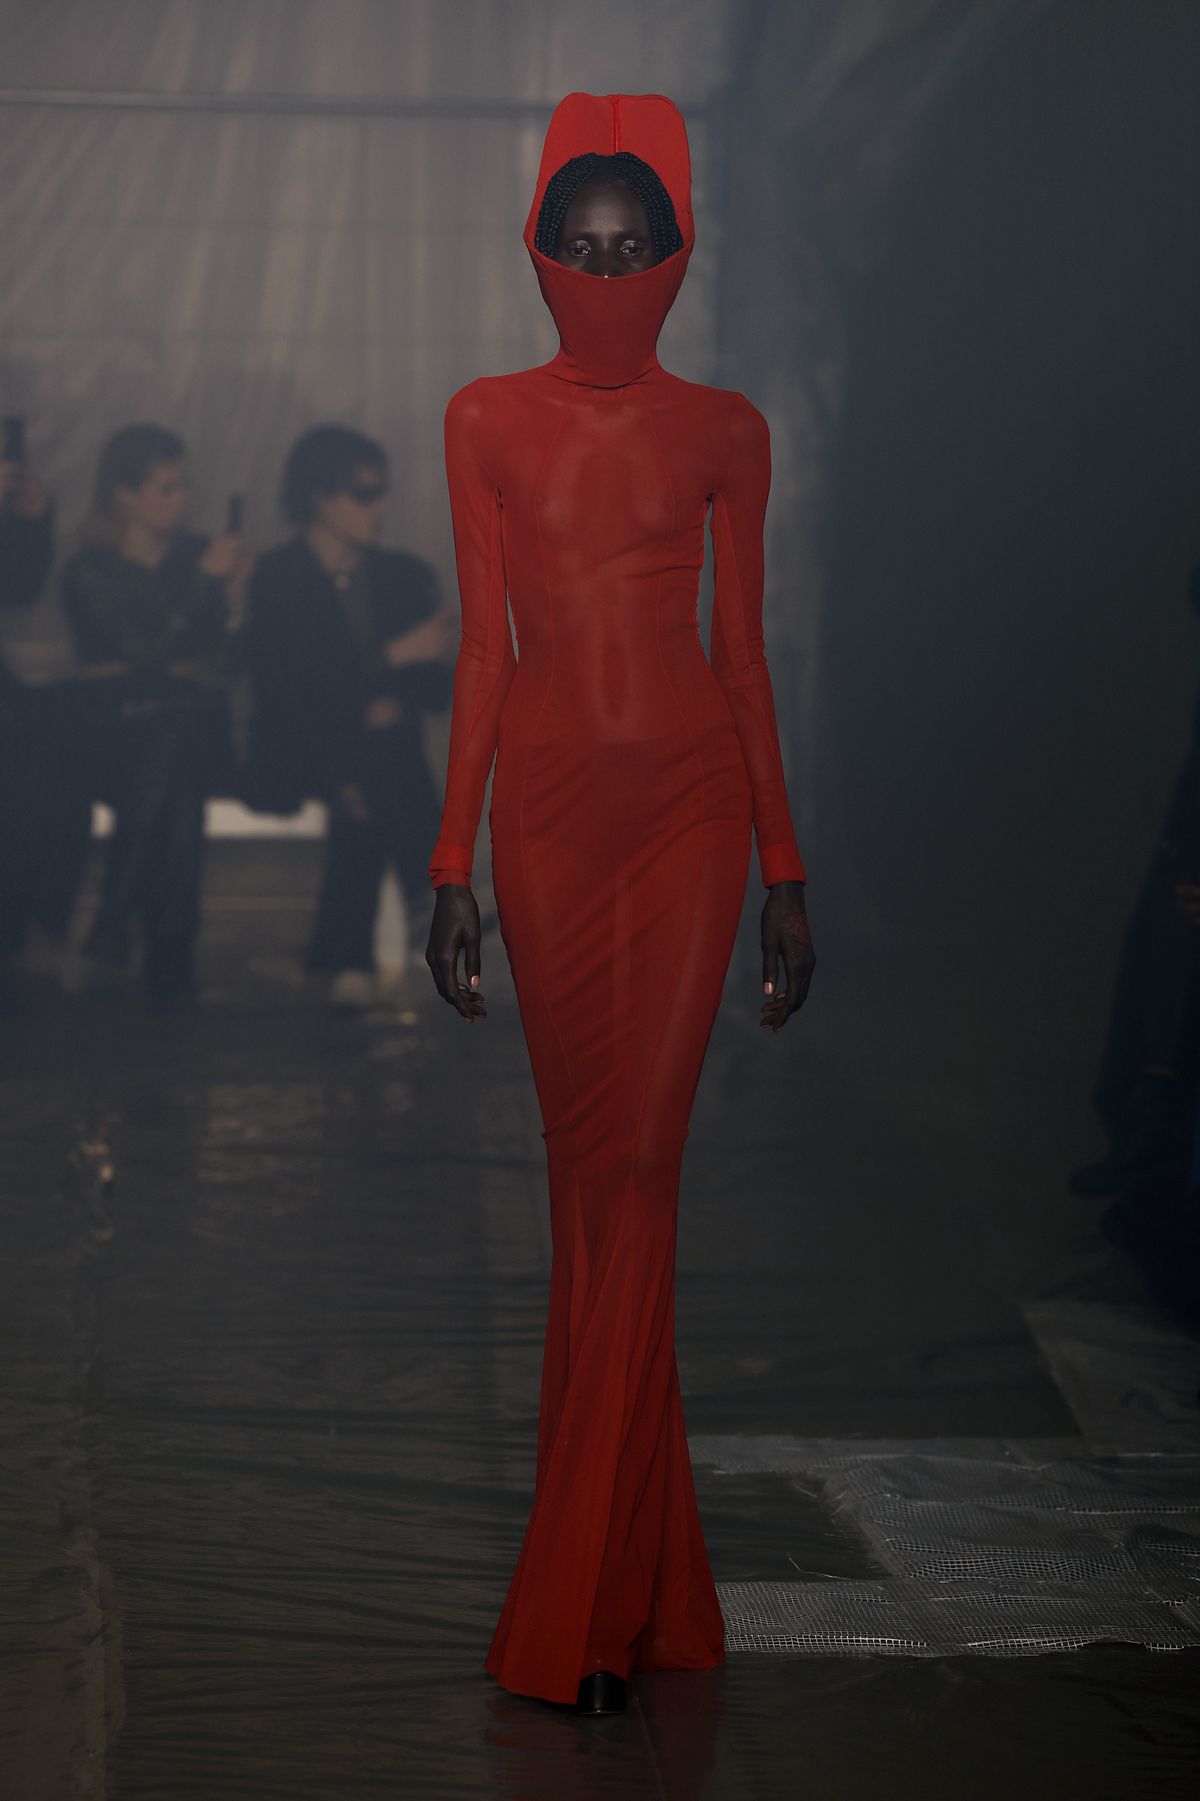 A model wearing a bright red dress with a hood walks the runway at the Han Kjobenhavn fashion show at Milan Fashion Week.